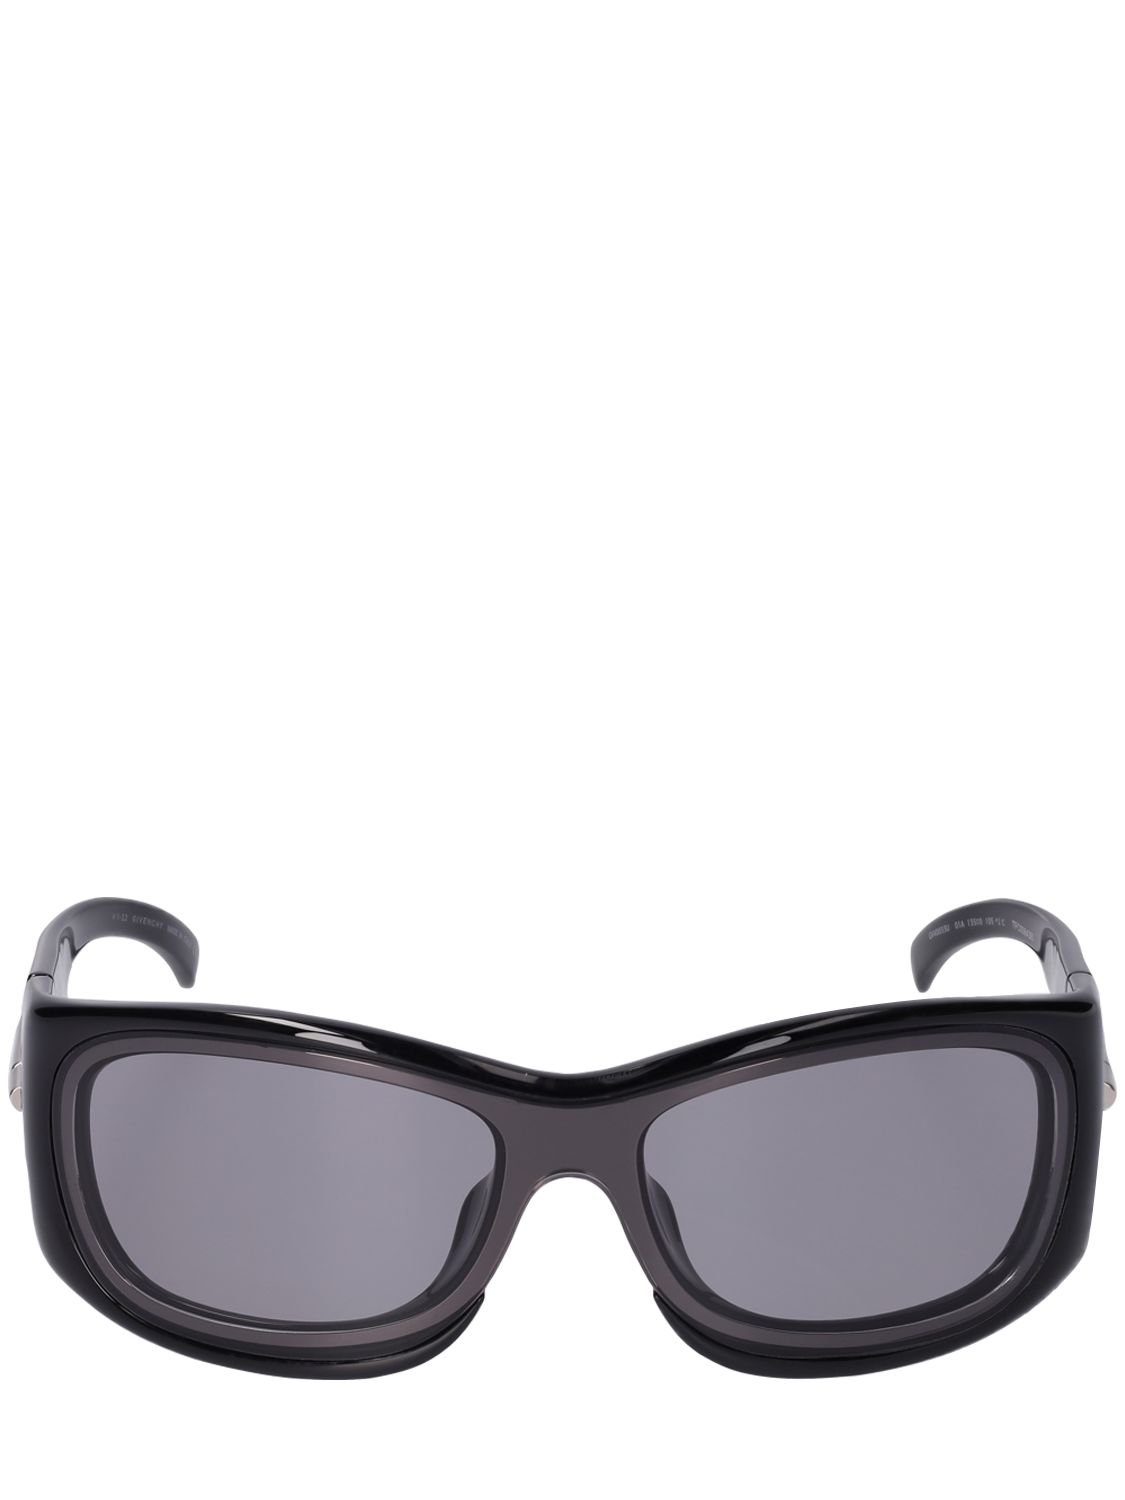 Givenchy G180 Oval Sunglasses In Black